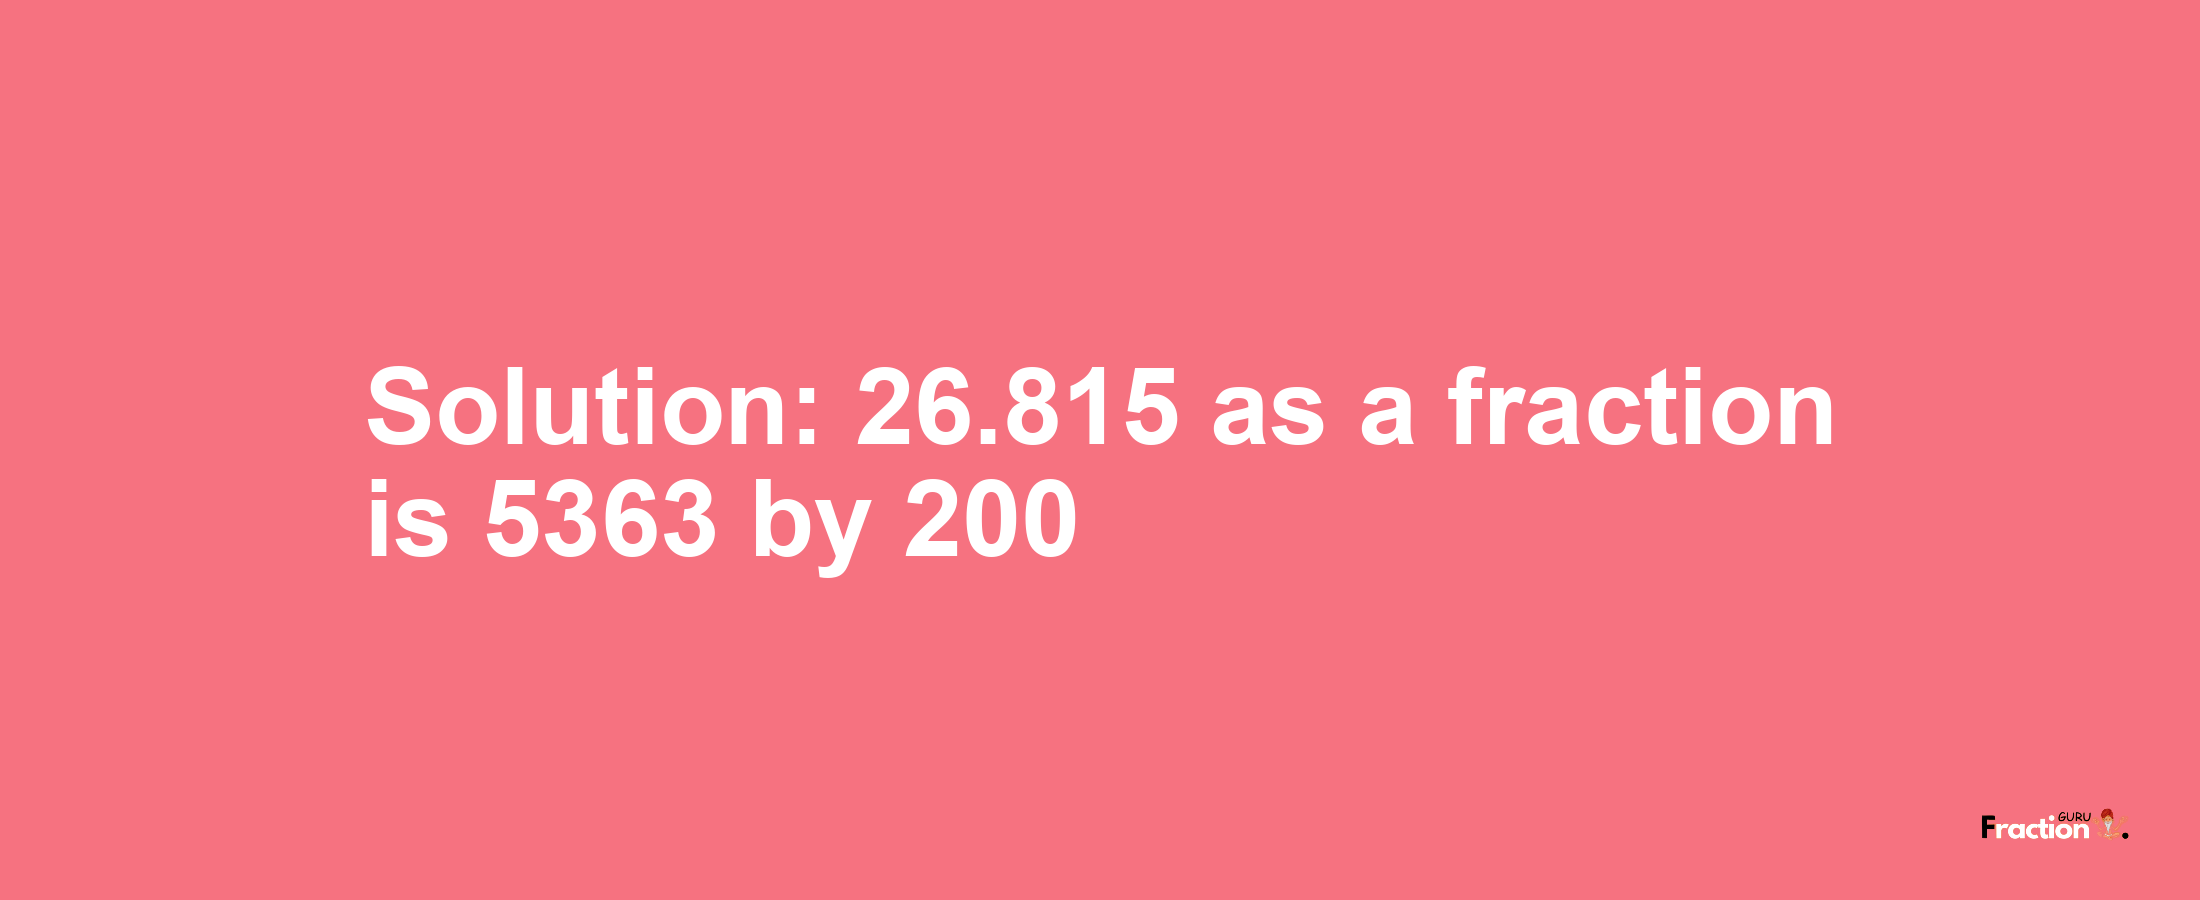 Solution:26.815 as a fraction is 5363/200